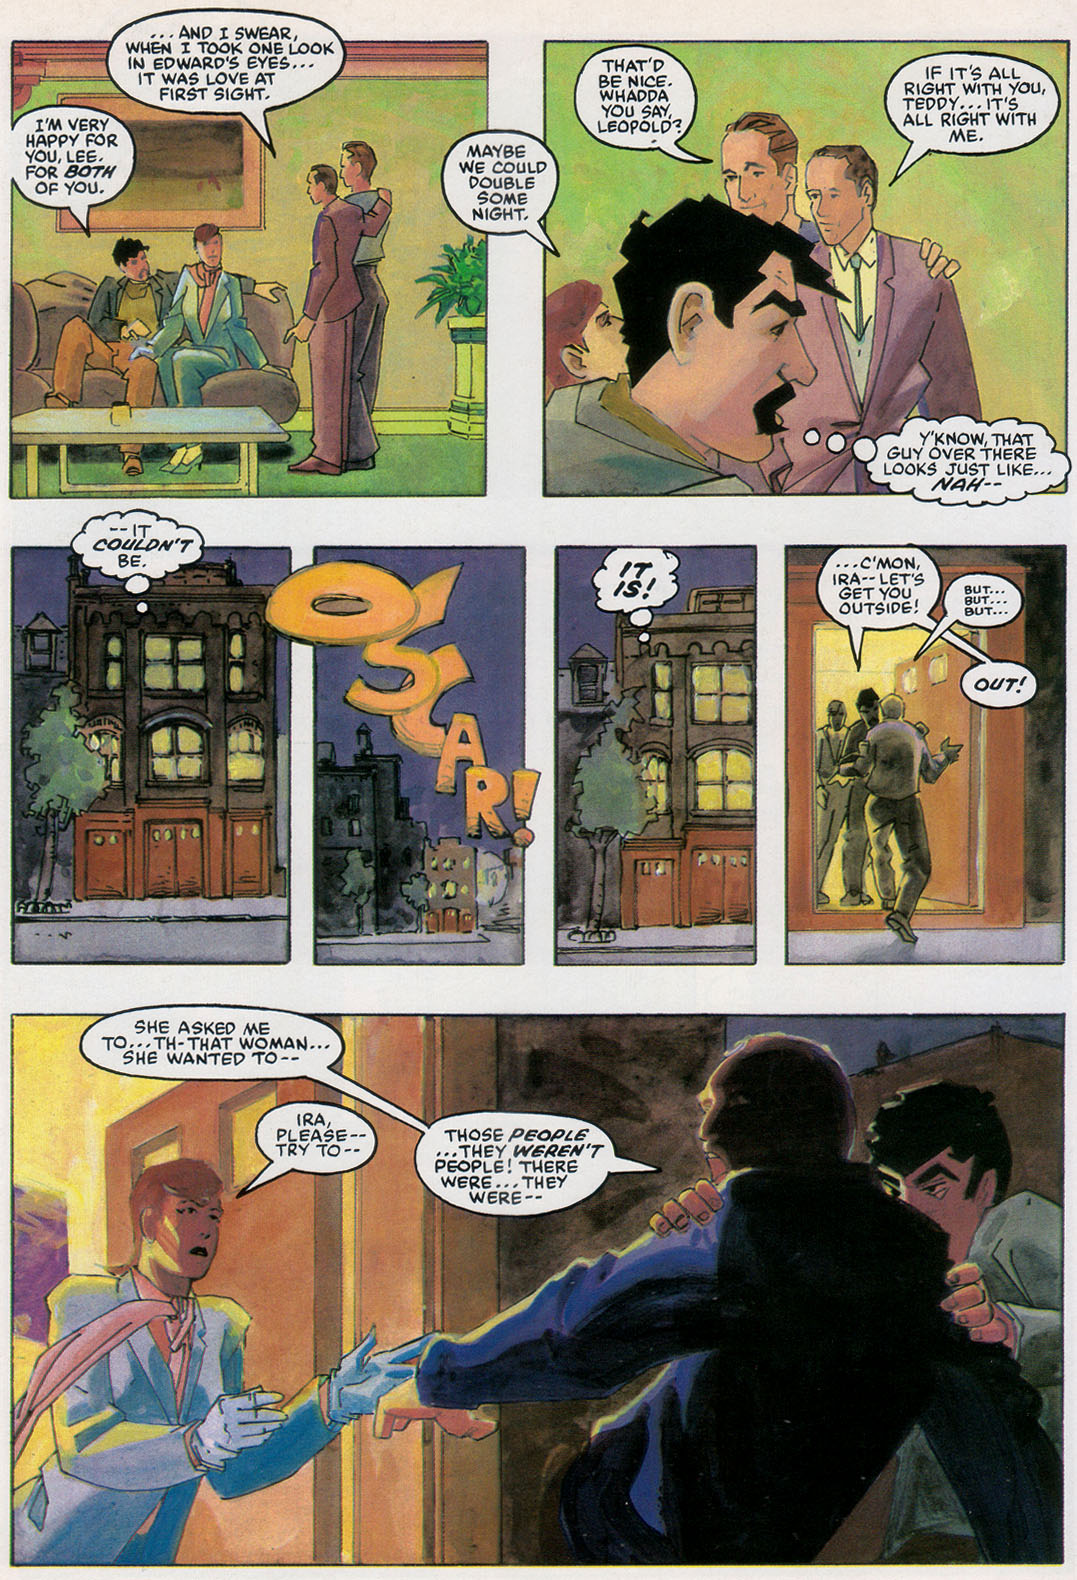 Marvel Graphic Novel issue 20 - Greenberg the Vampire - Page 42